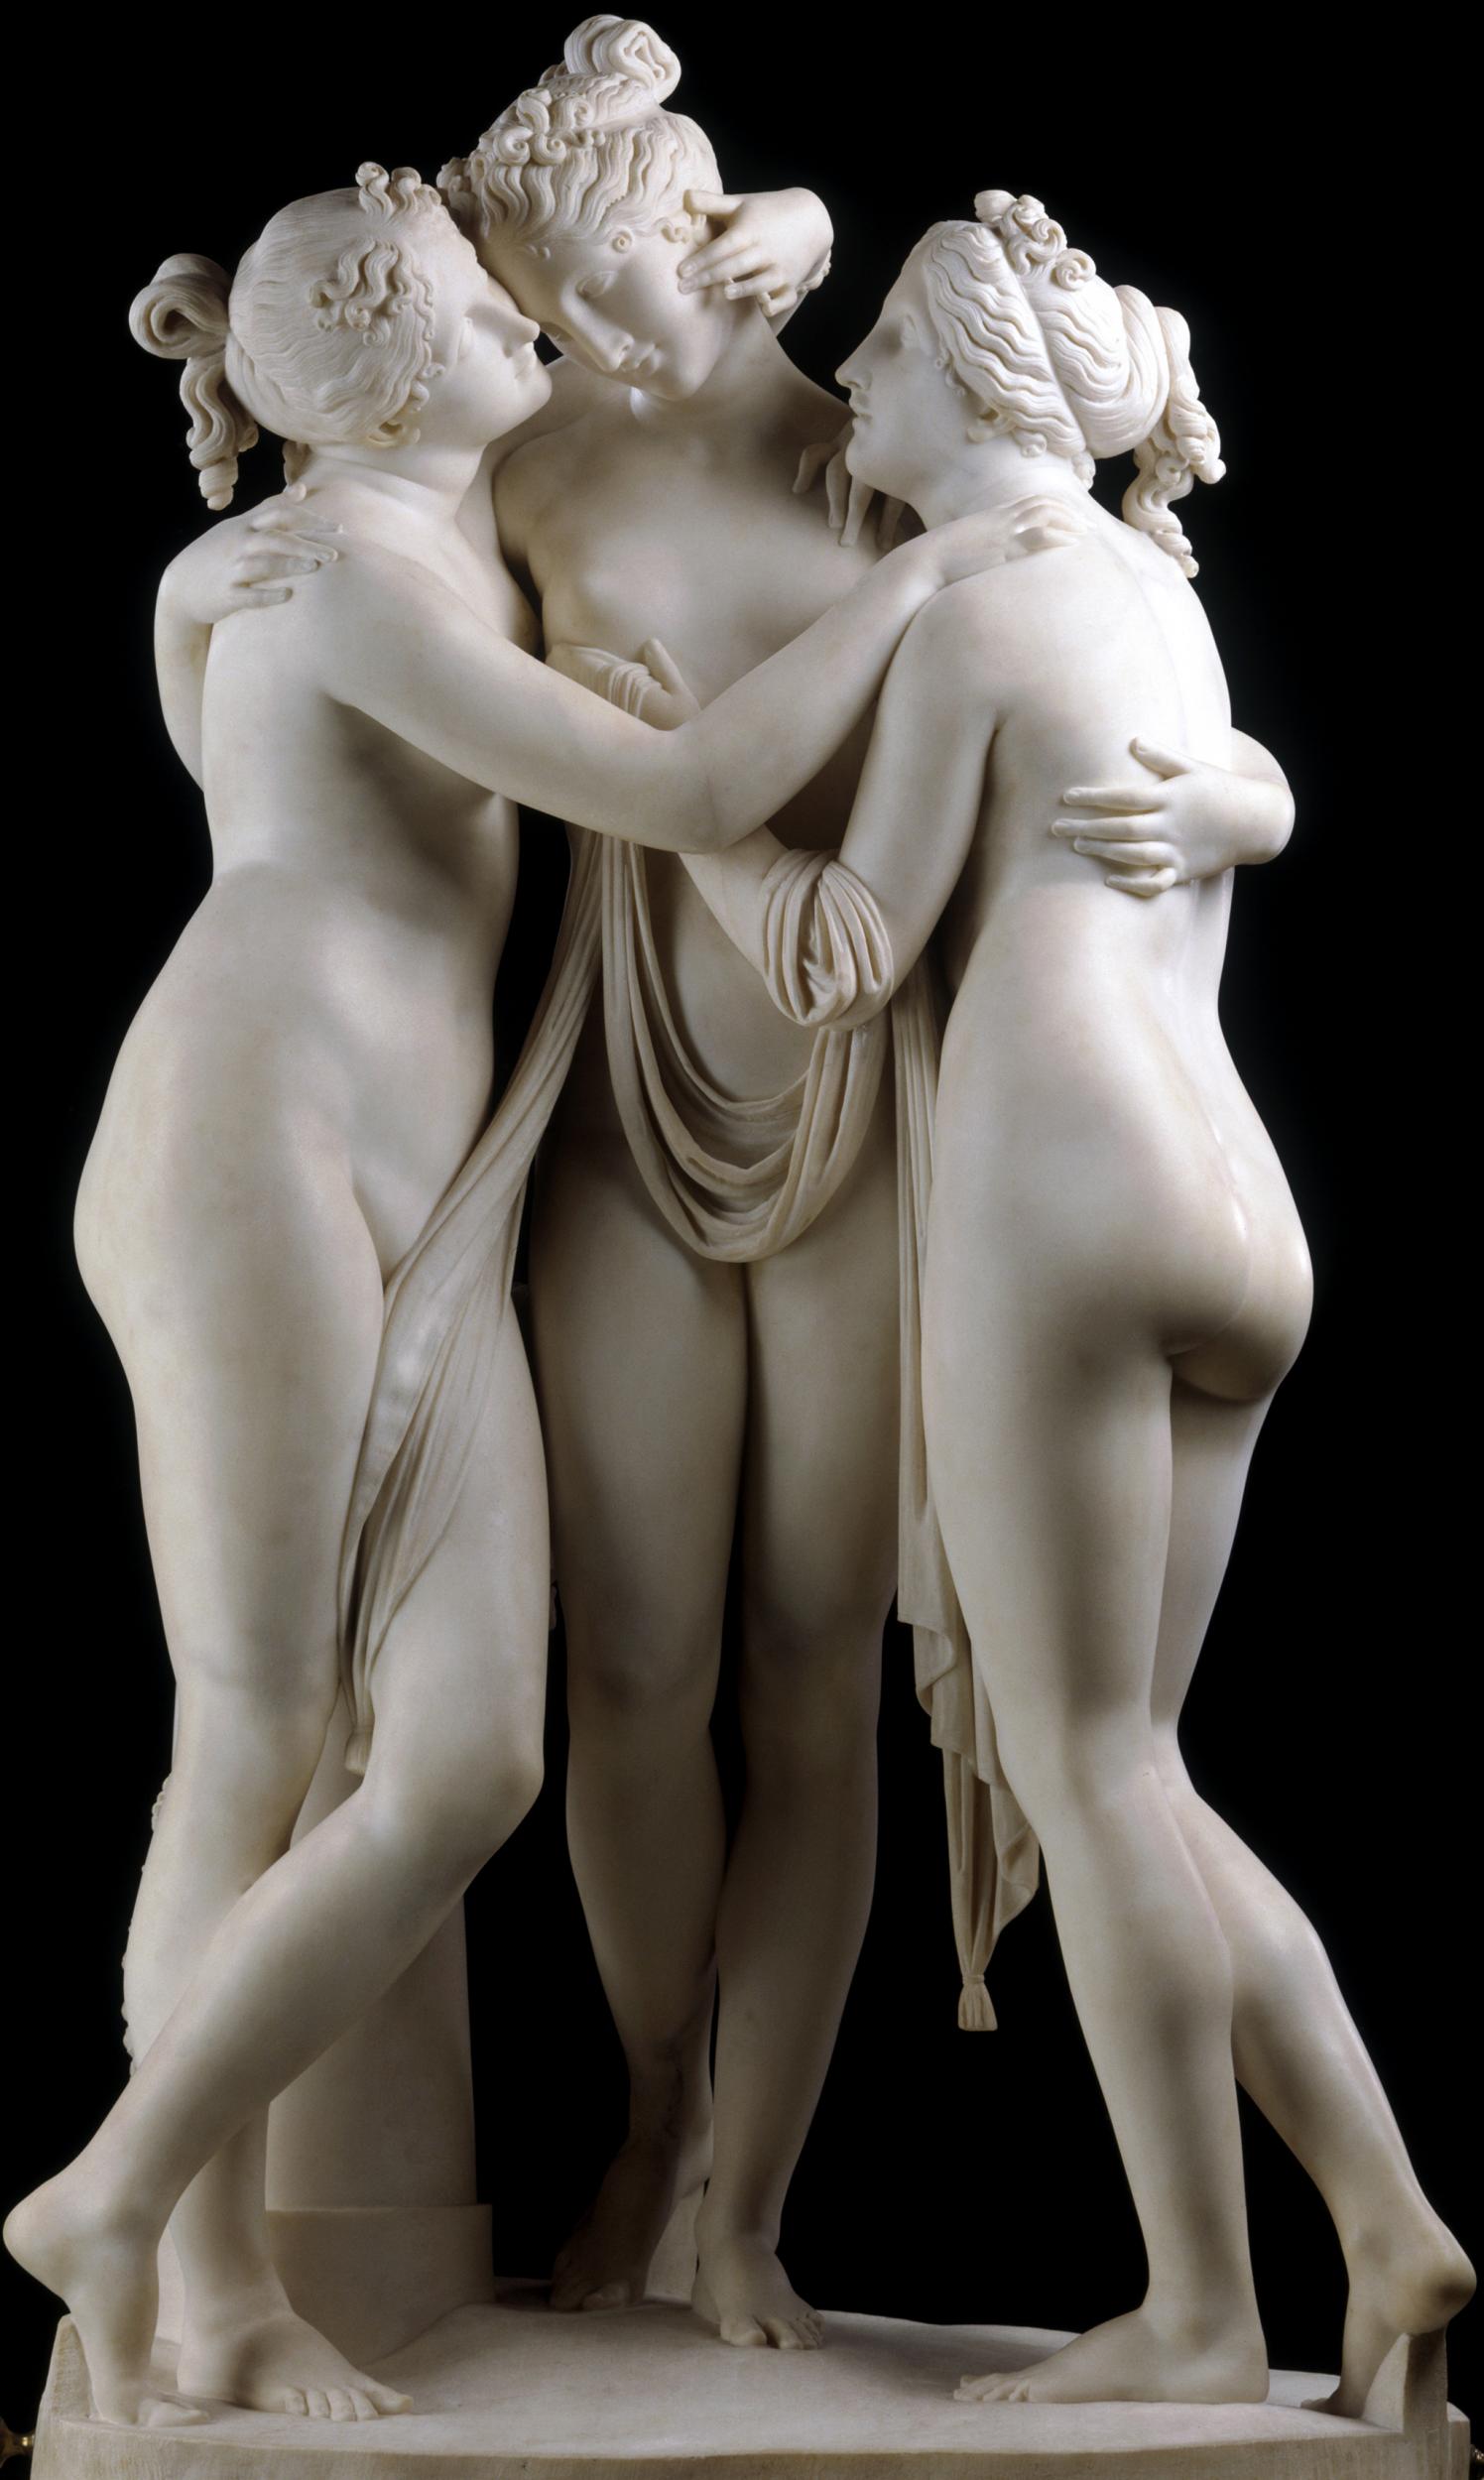 The Greeks gave us the original Three Graces, the Charites